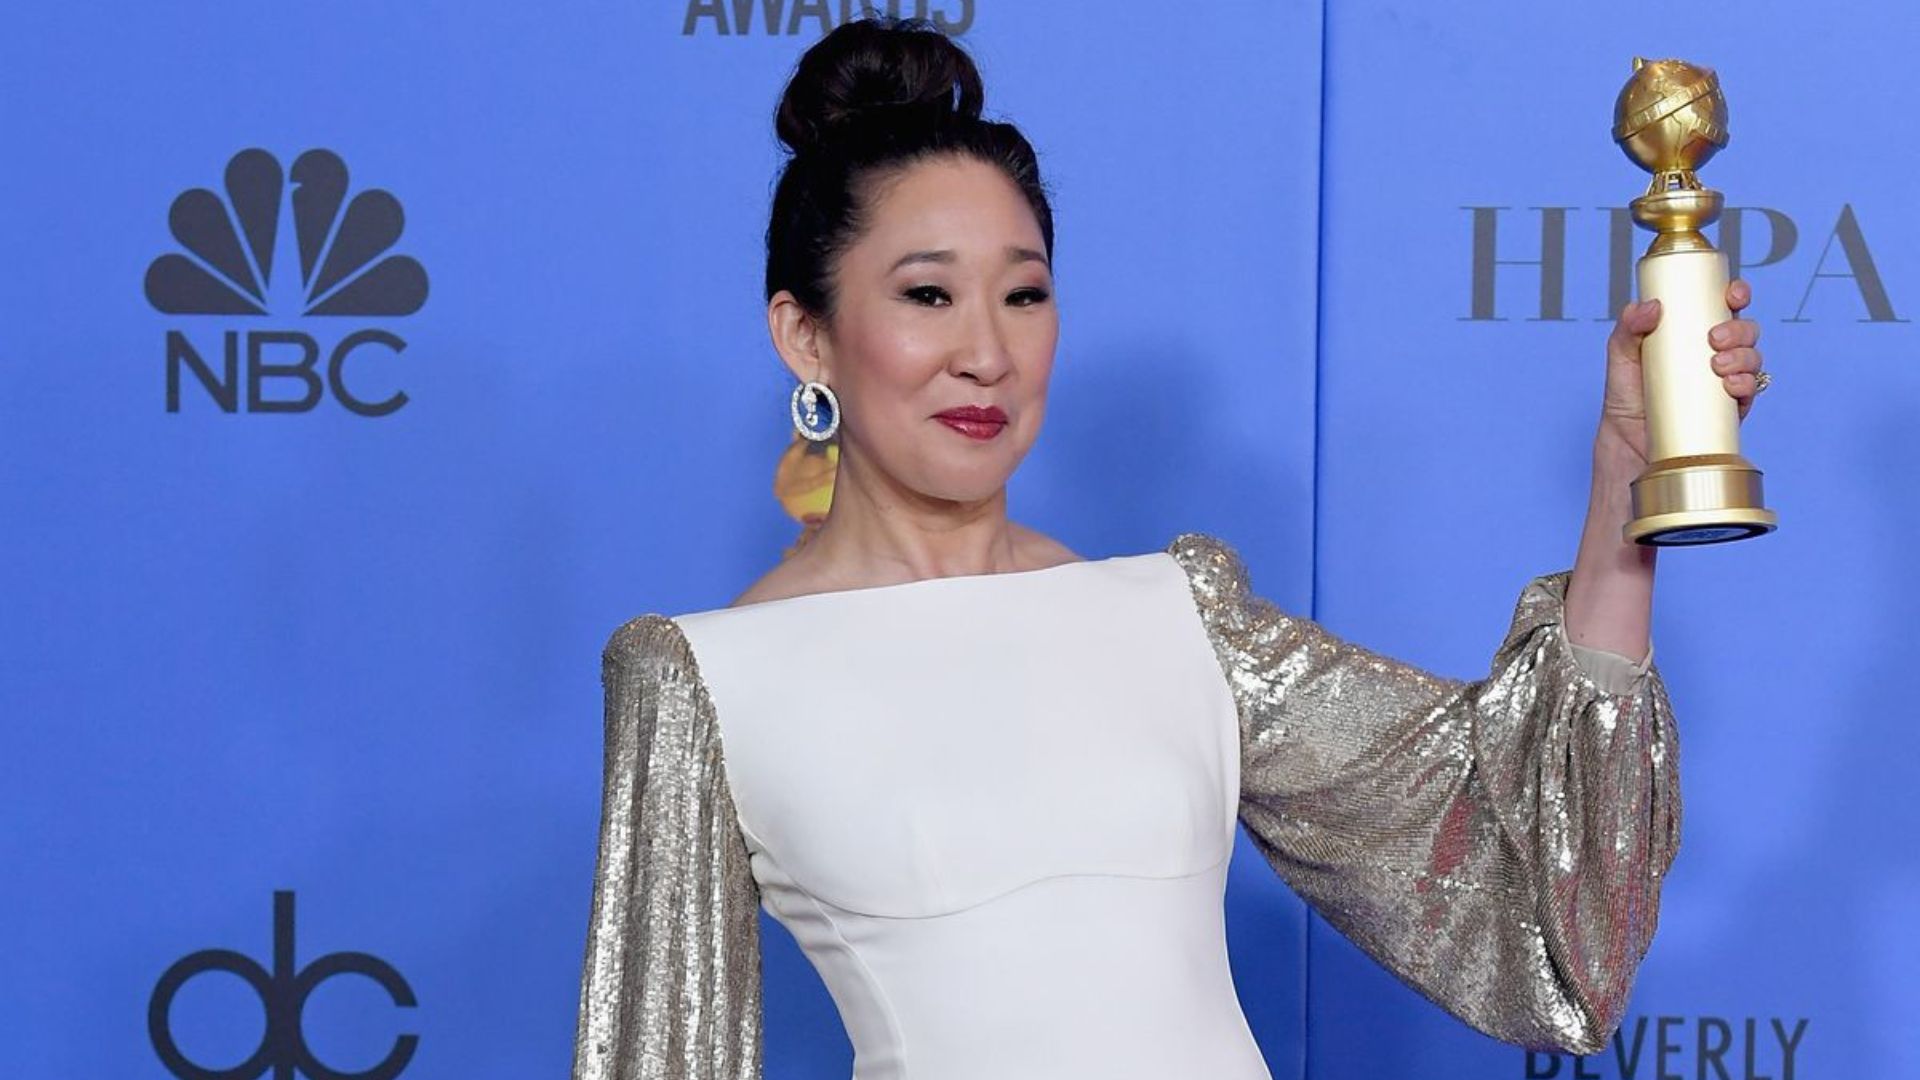 Sandra Oh Wearing White Dress And Holding A Trophy